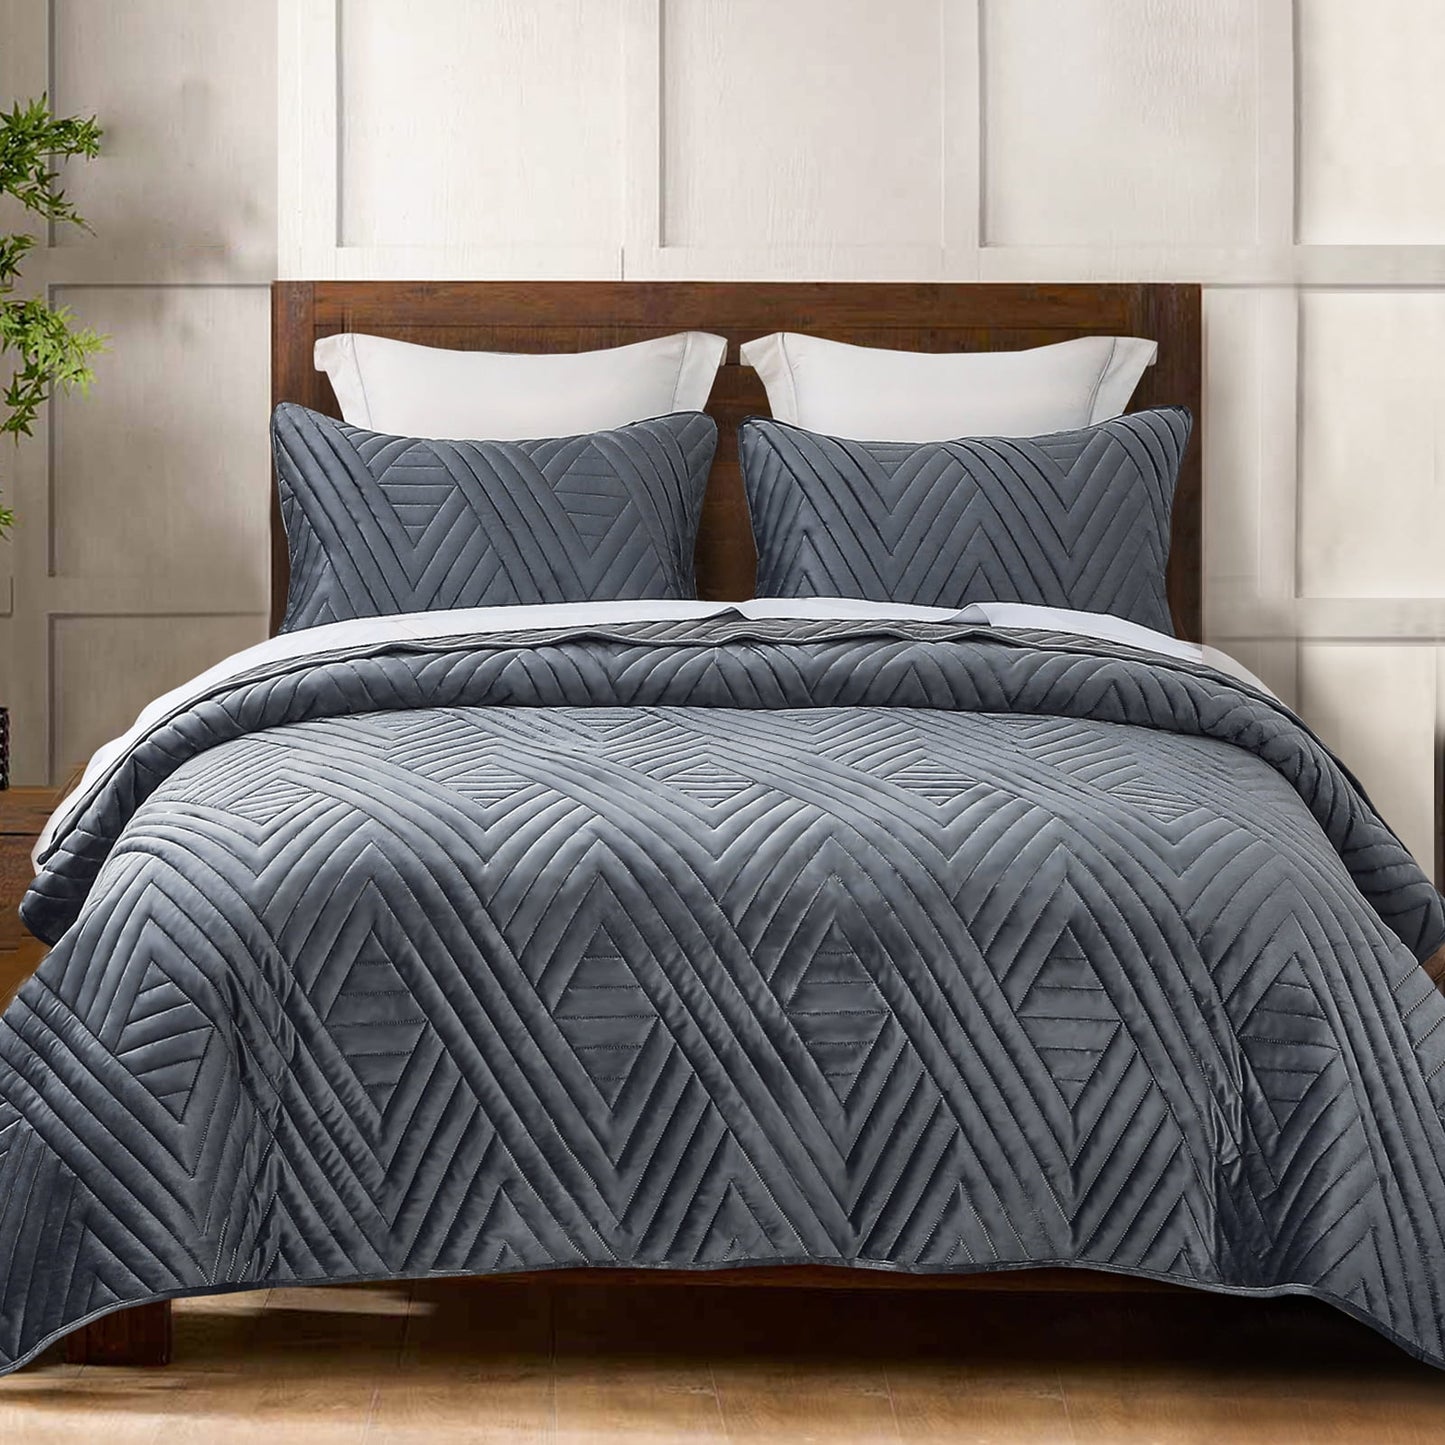 Exclusivo Mezcla Super Plush Velvet Quilt Twin Size with Pillow Sham, Luxury Soft Reversible 2 Piece Bedspreads Coverlet Comforter set for all seasons, Lightweight and Warm, Dark Grey